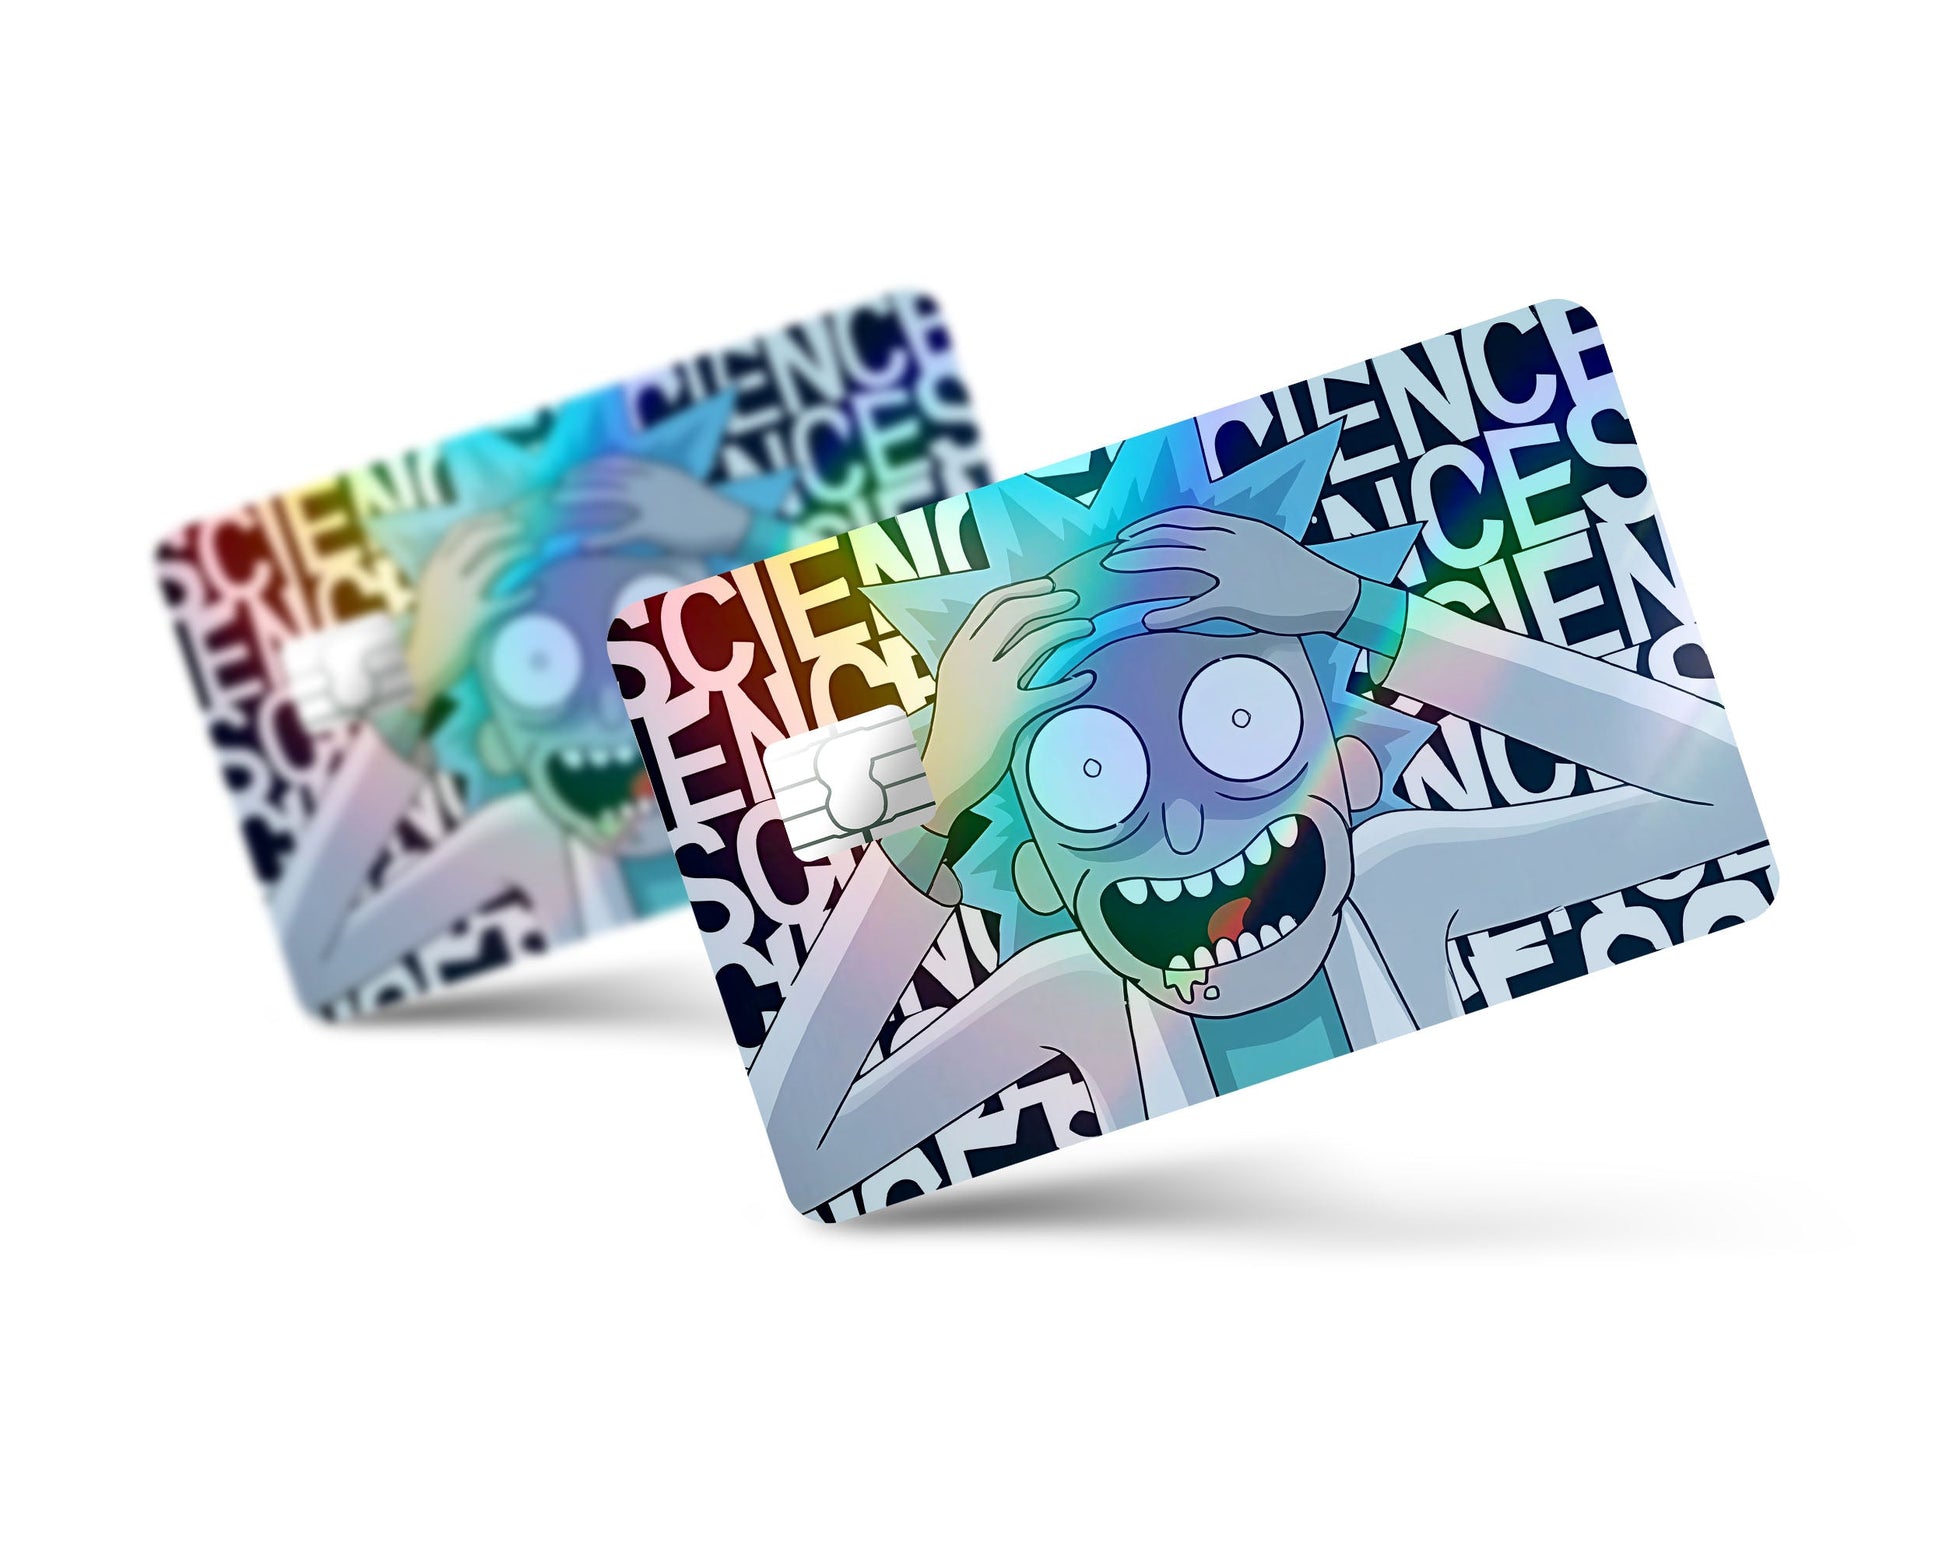 Anime Town Creations Holographic Credit Card Insane Rick Full Skins - Anime Rick and Morty Holographic Credit Card Skin